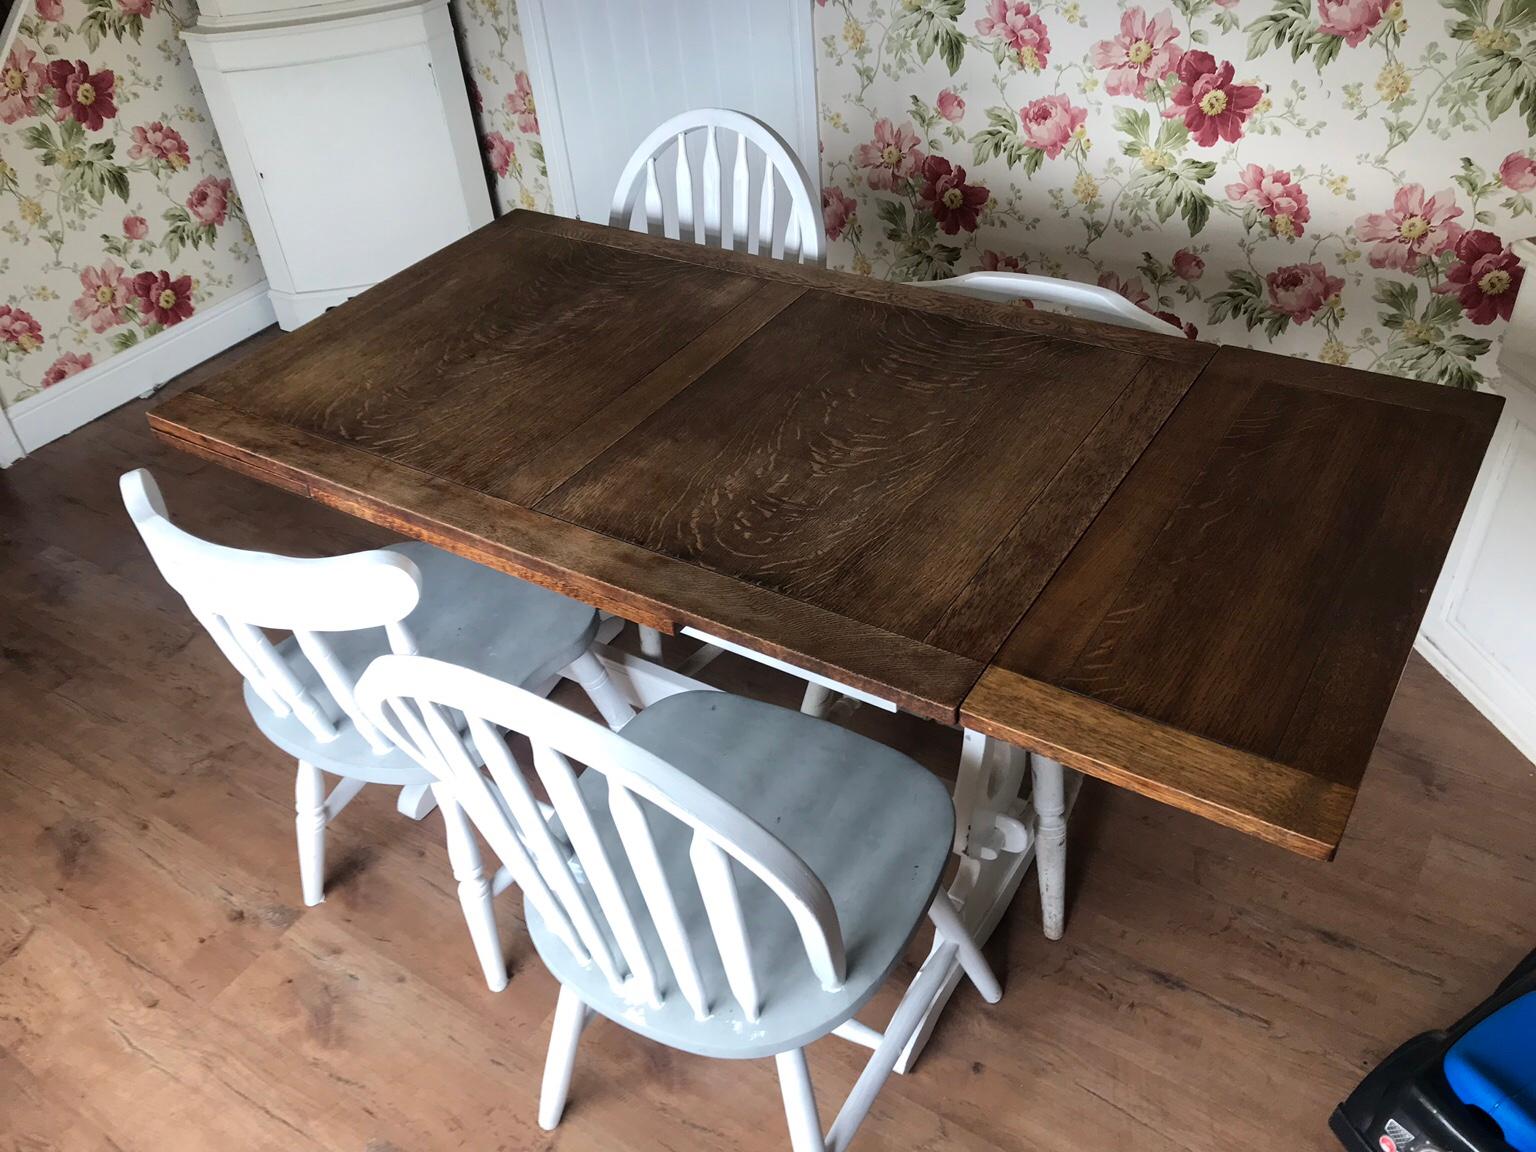 Solid Wooden Extending Table And Chairs In Wa7 Weston Fur 150 00